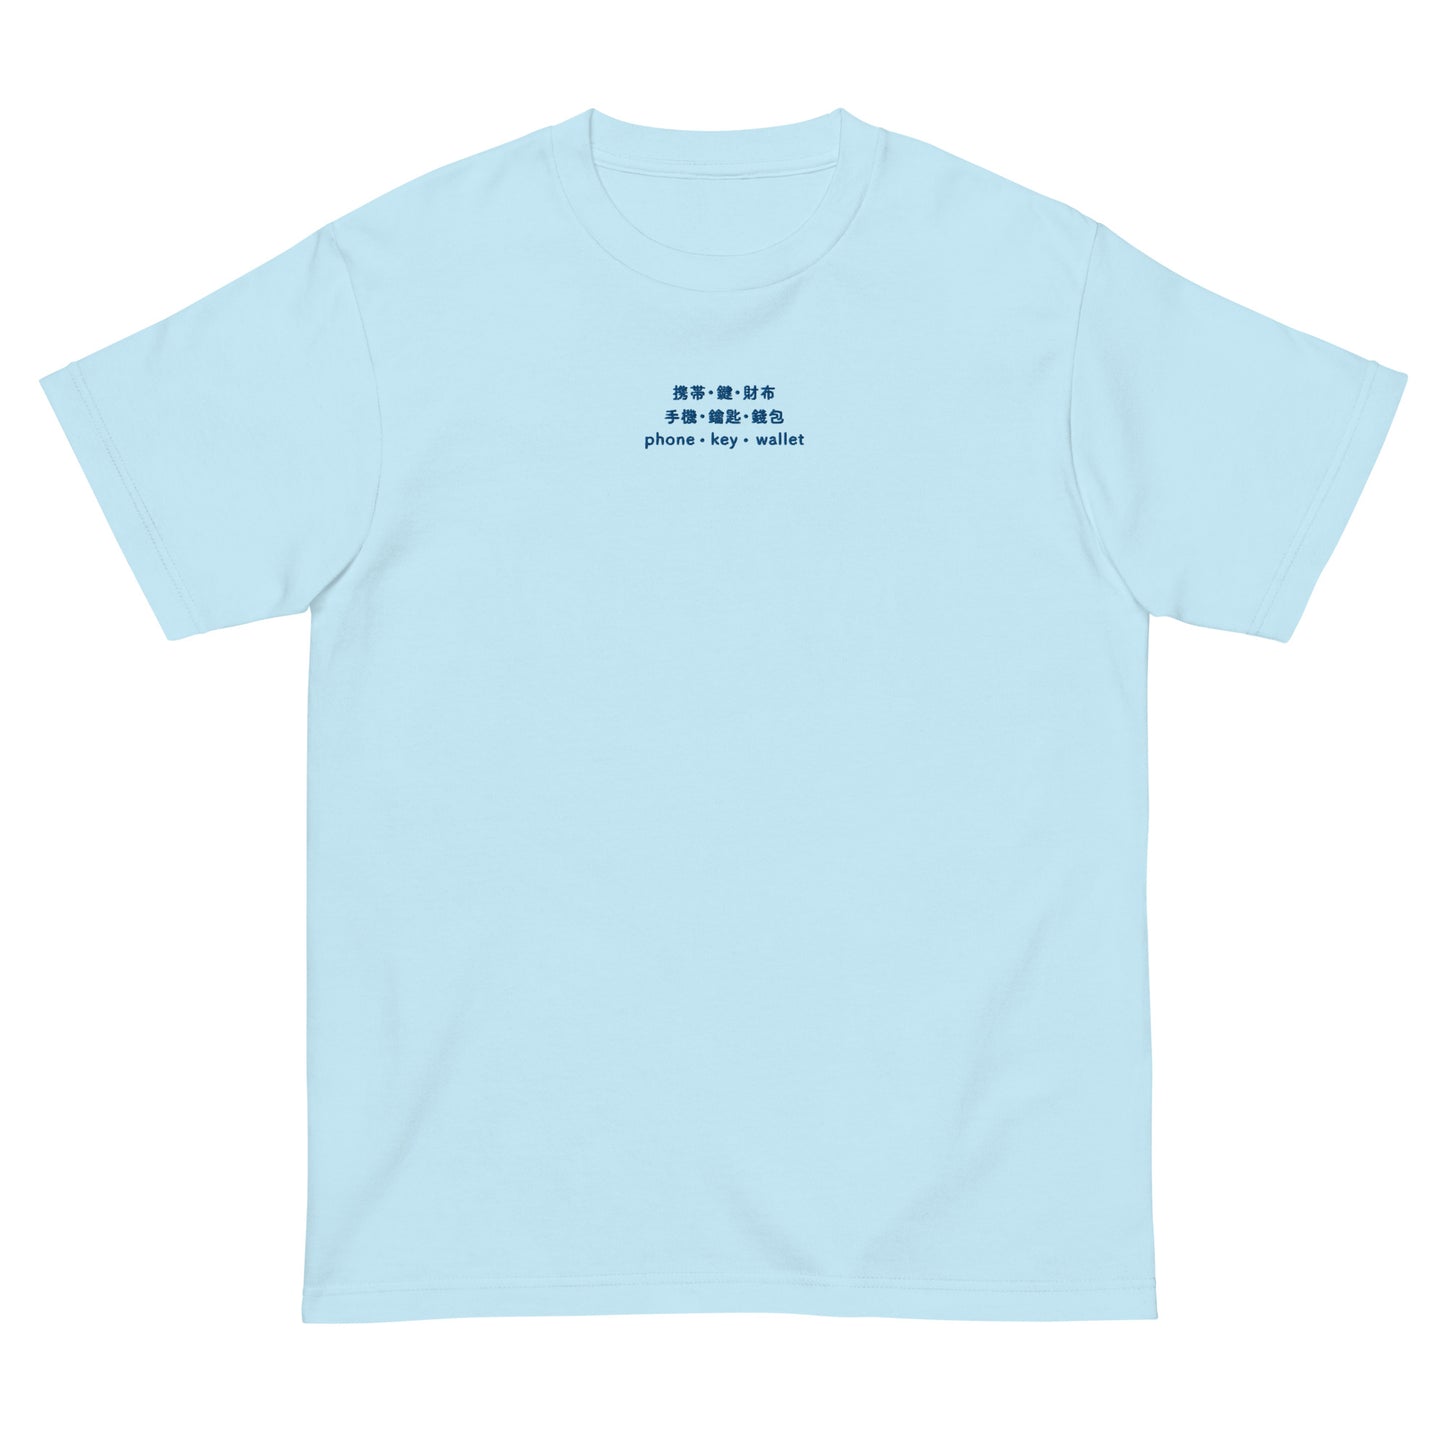 Light Blue High Quality Tee - Front Design with an Blue Embroidery "Phone/Key/Wallet" in Japanese,Chinese and English